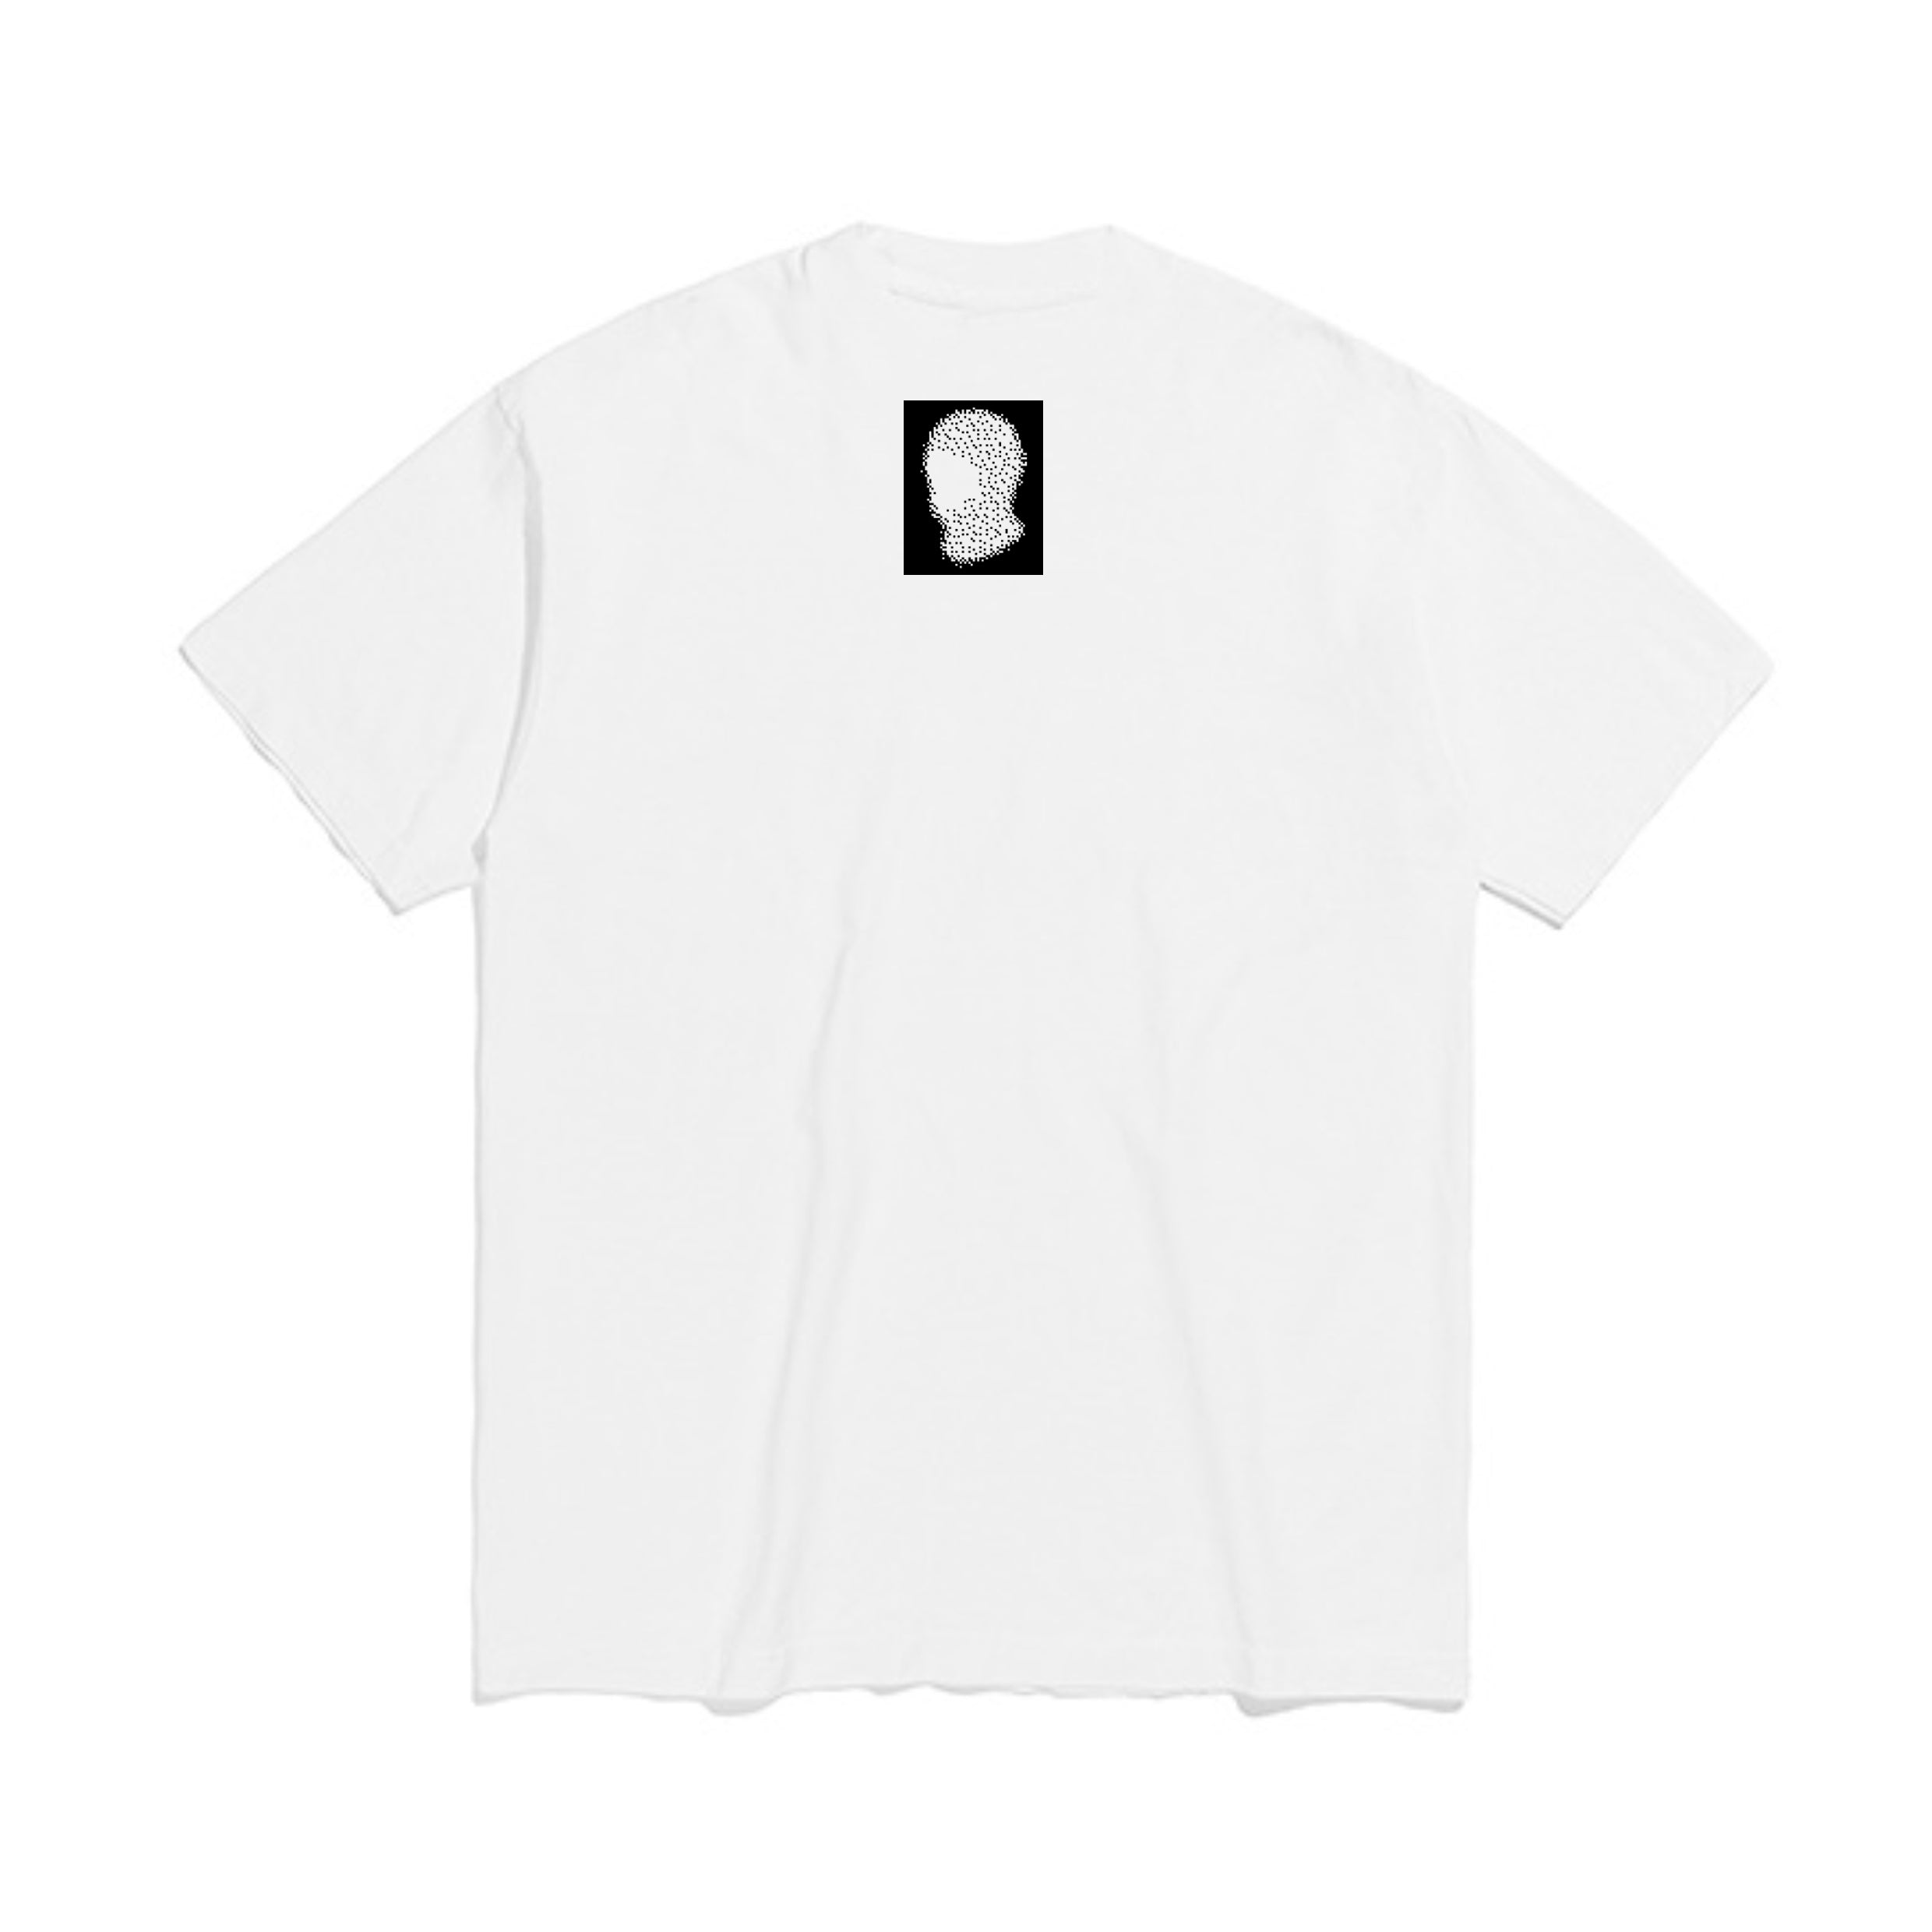 Ramps - Ramps - End Scene Tee - White